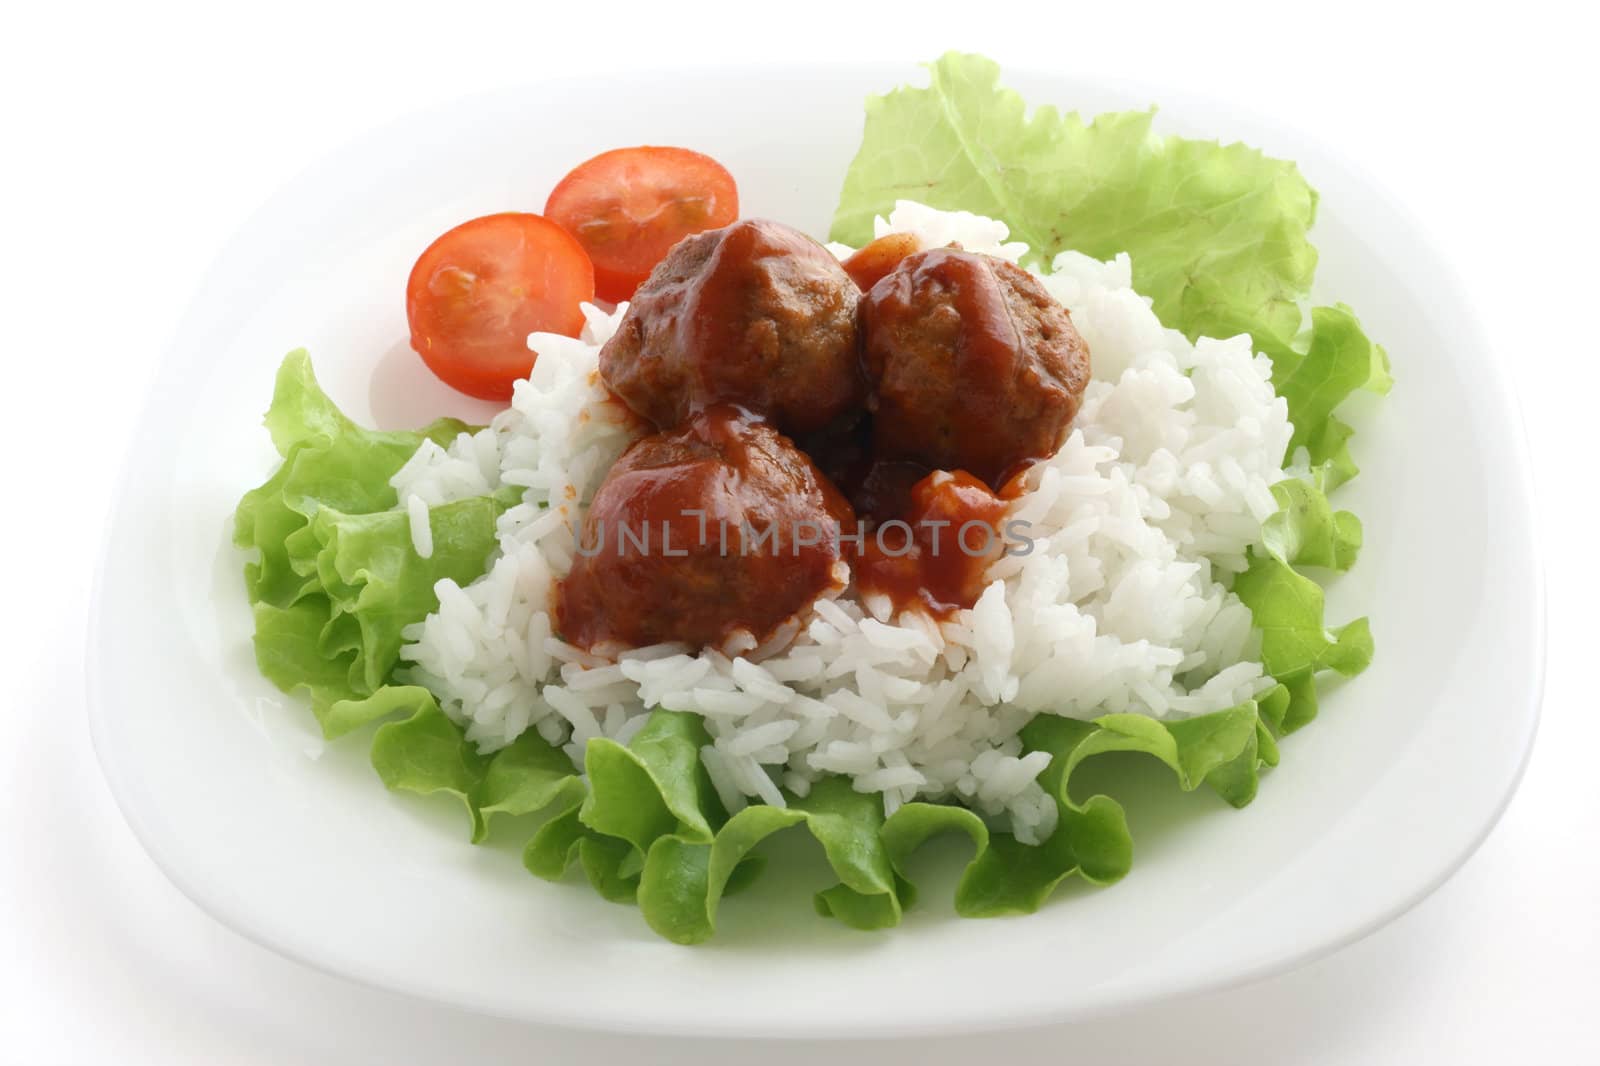 meatballs with rice and lettuce by nataliamylova